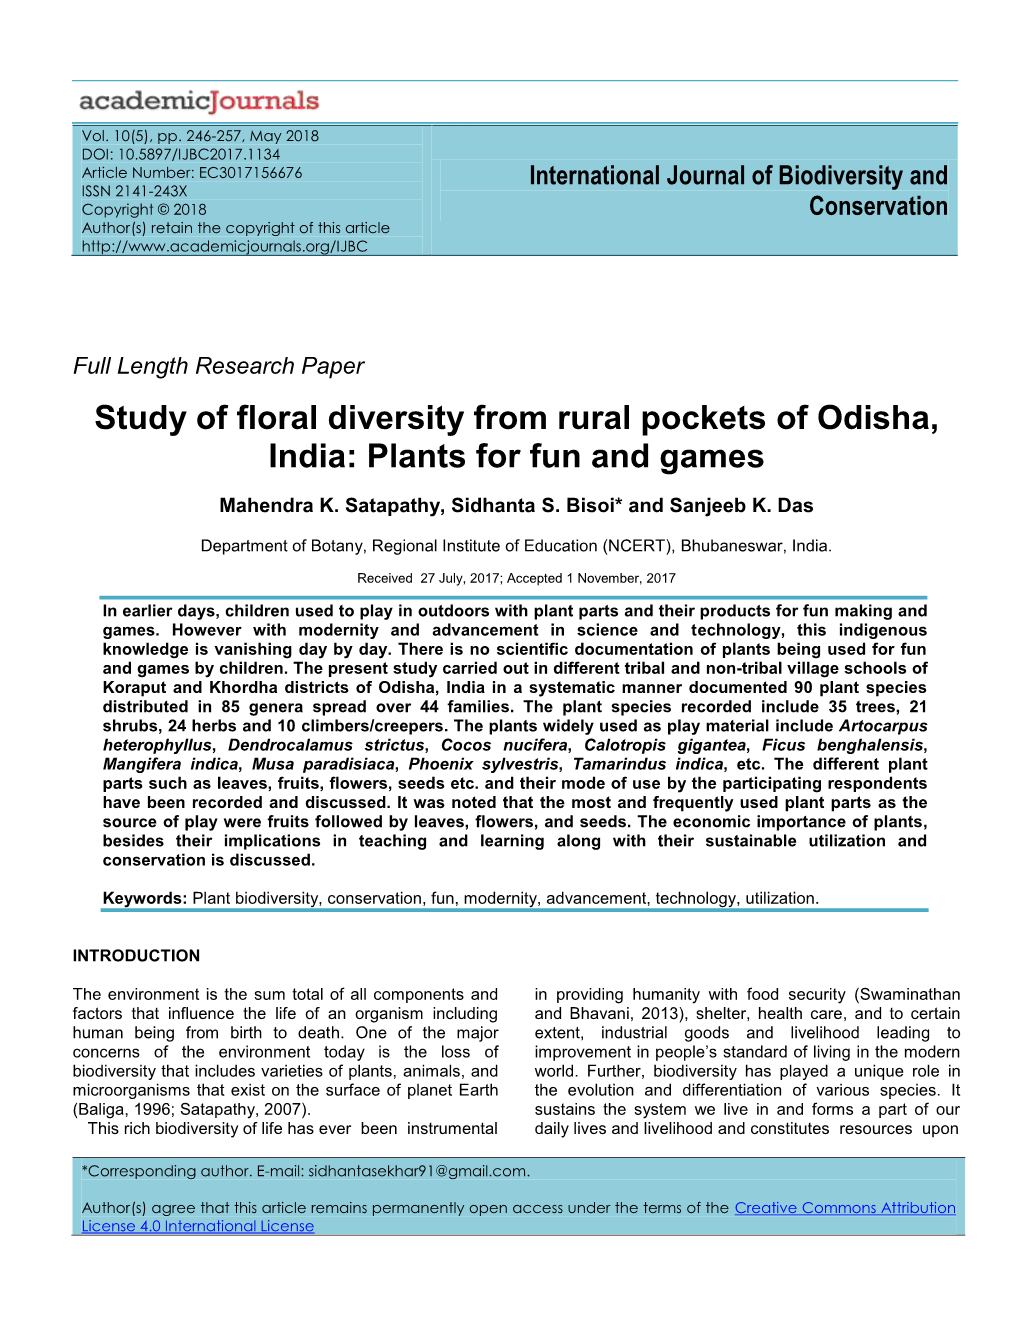 Study of Floral Diversity from Rural Pockets of Odisha, India: Plants for Fun and Games